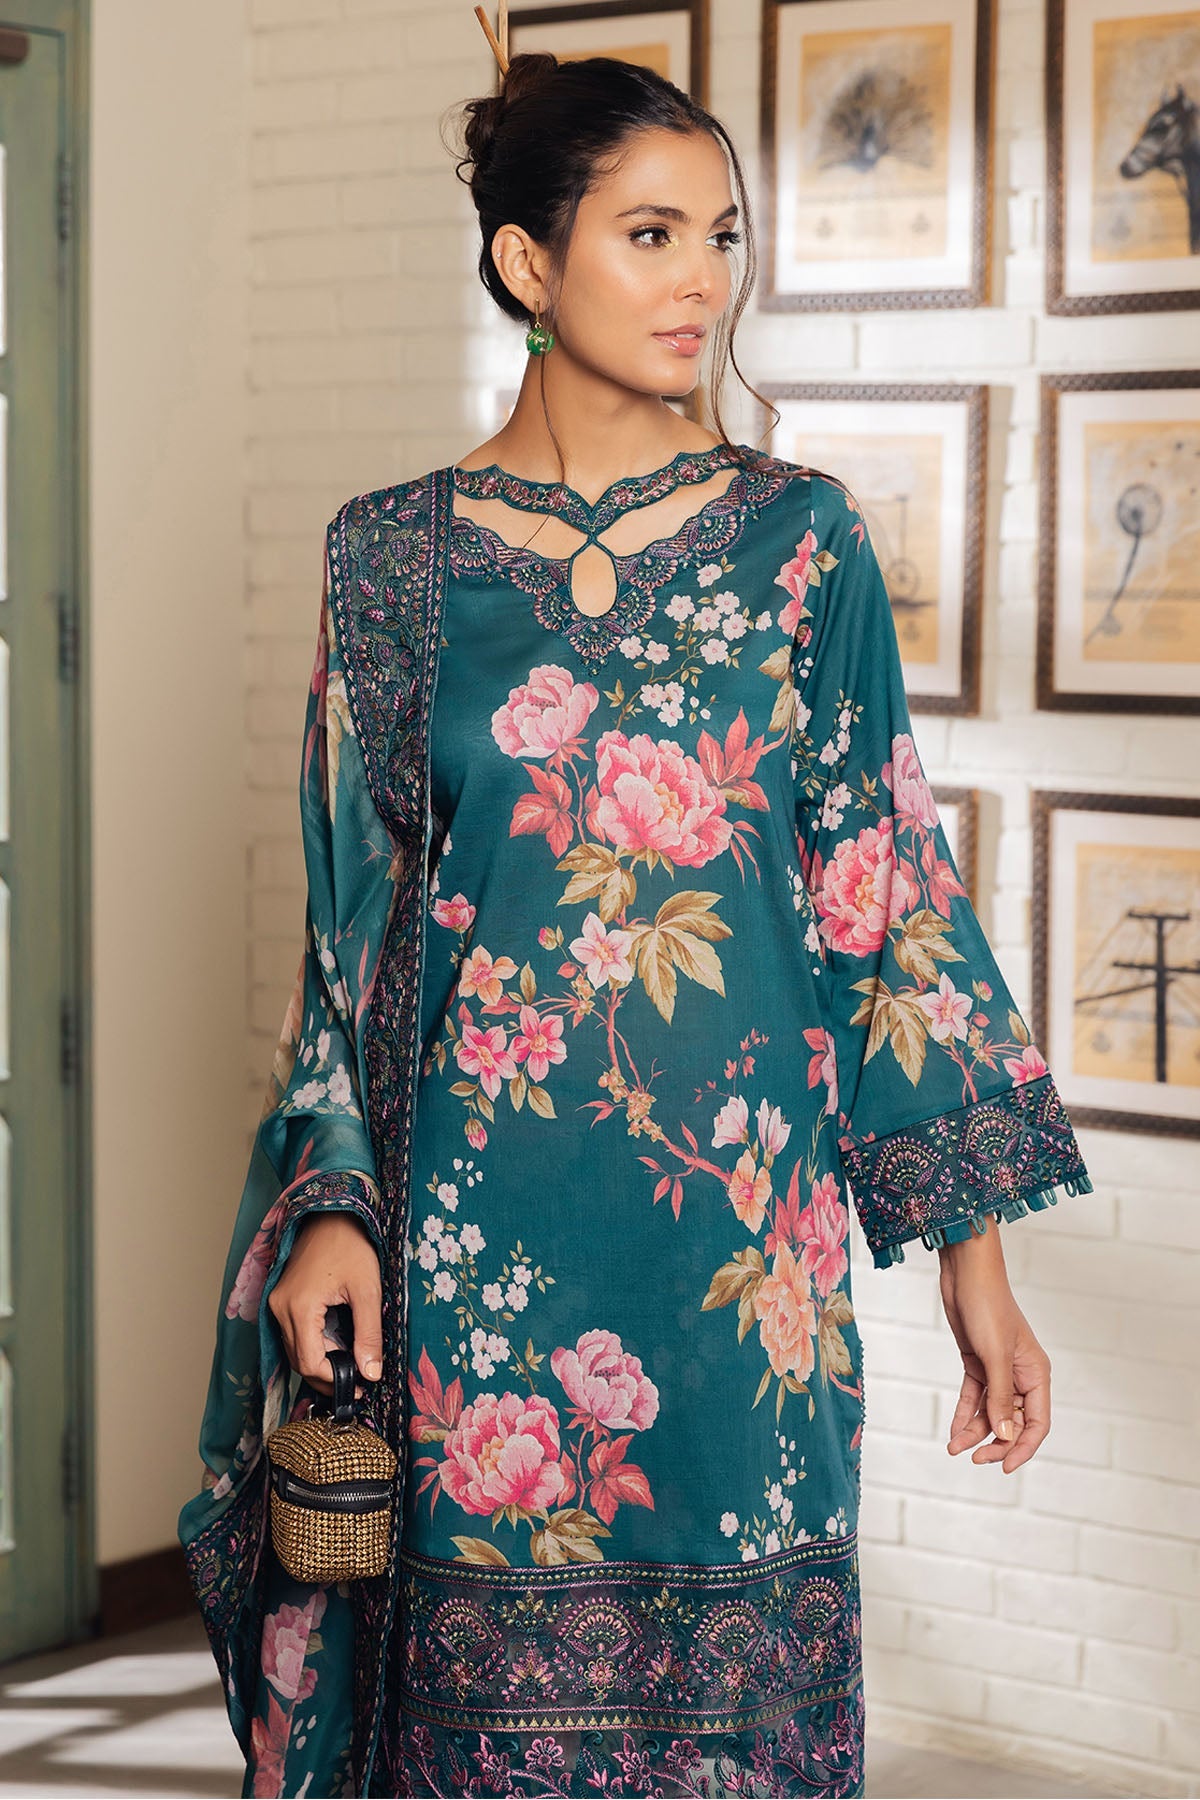 Shop Now, GL-06 - Glam Girl - Lawn Collection 2023 - Nureh - Shahana Collection UK - Wedding and Bridal Party Dresses - Eid edit 2023